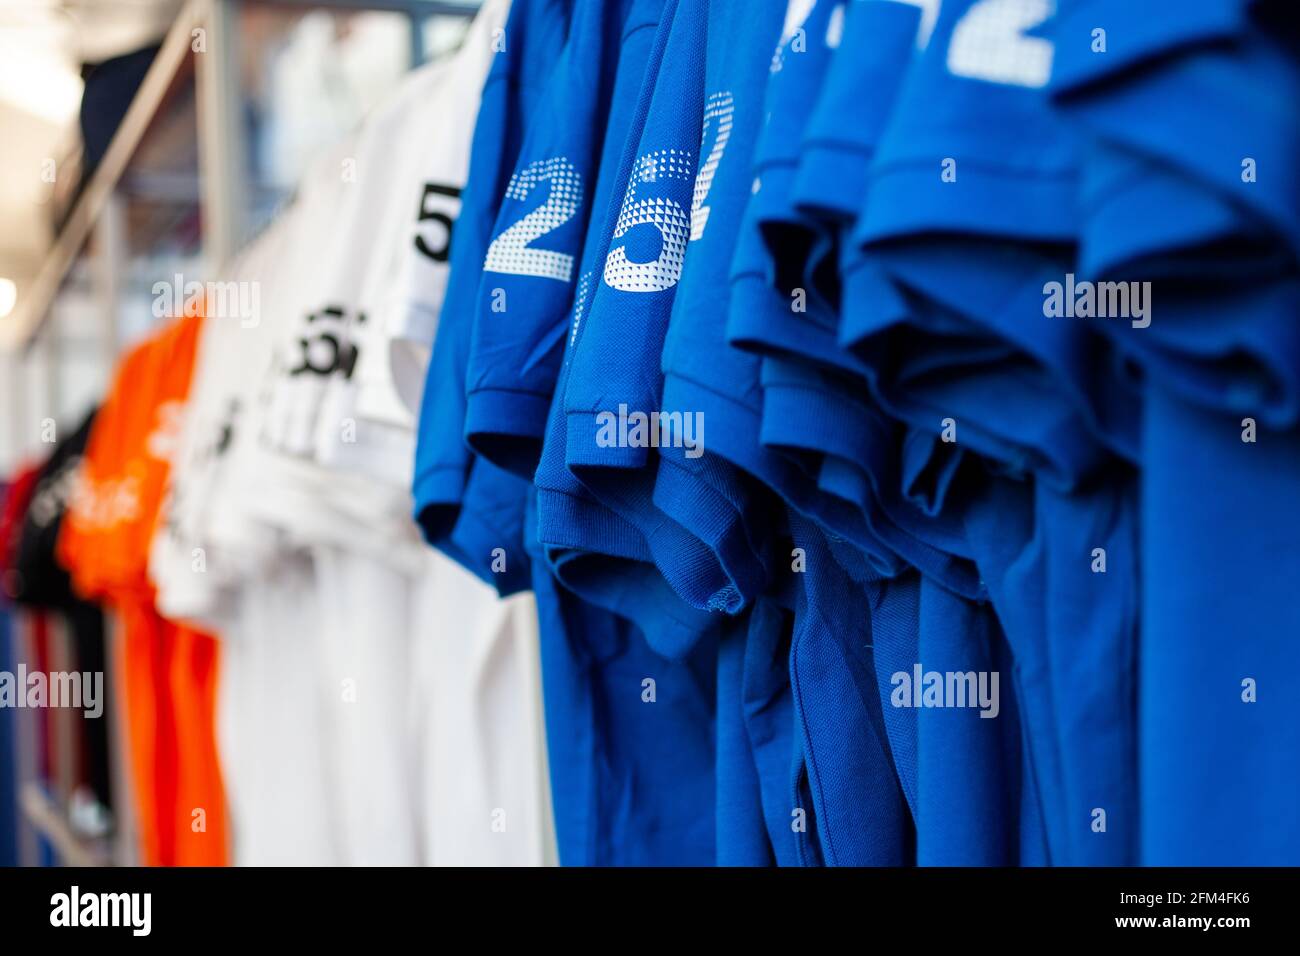 View of colorful t-shirts on hangers exposed in a clothes shop Stock Photo